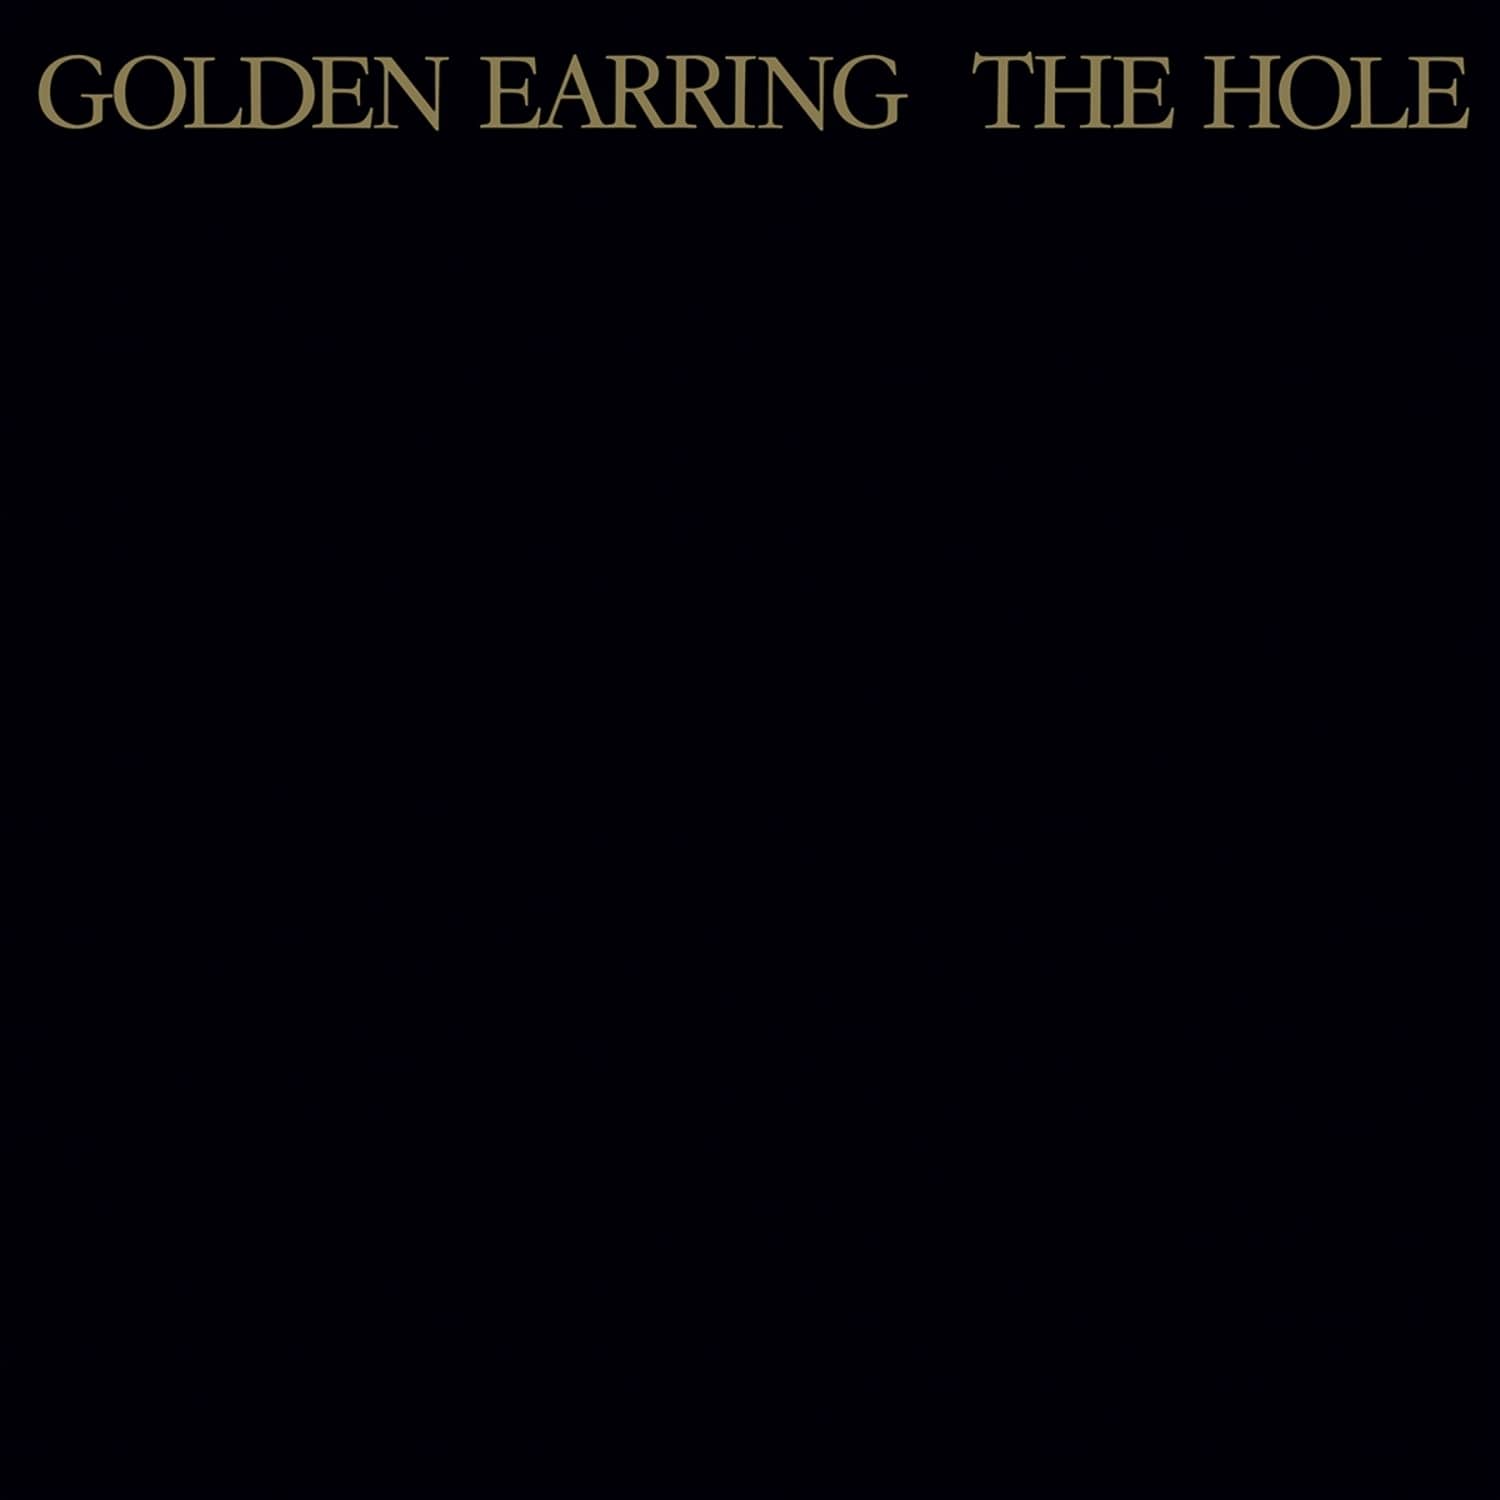 Golden Earring - THE HOLE 